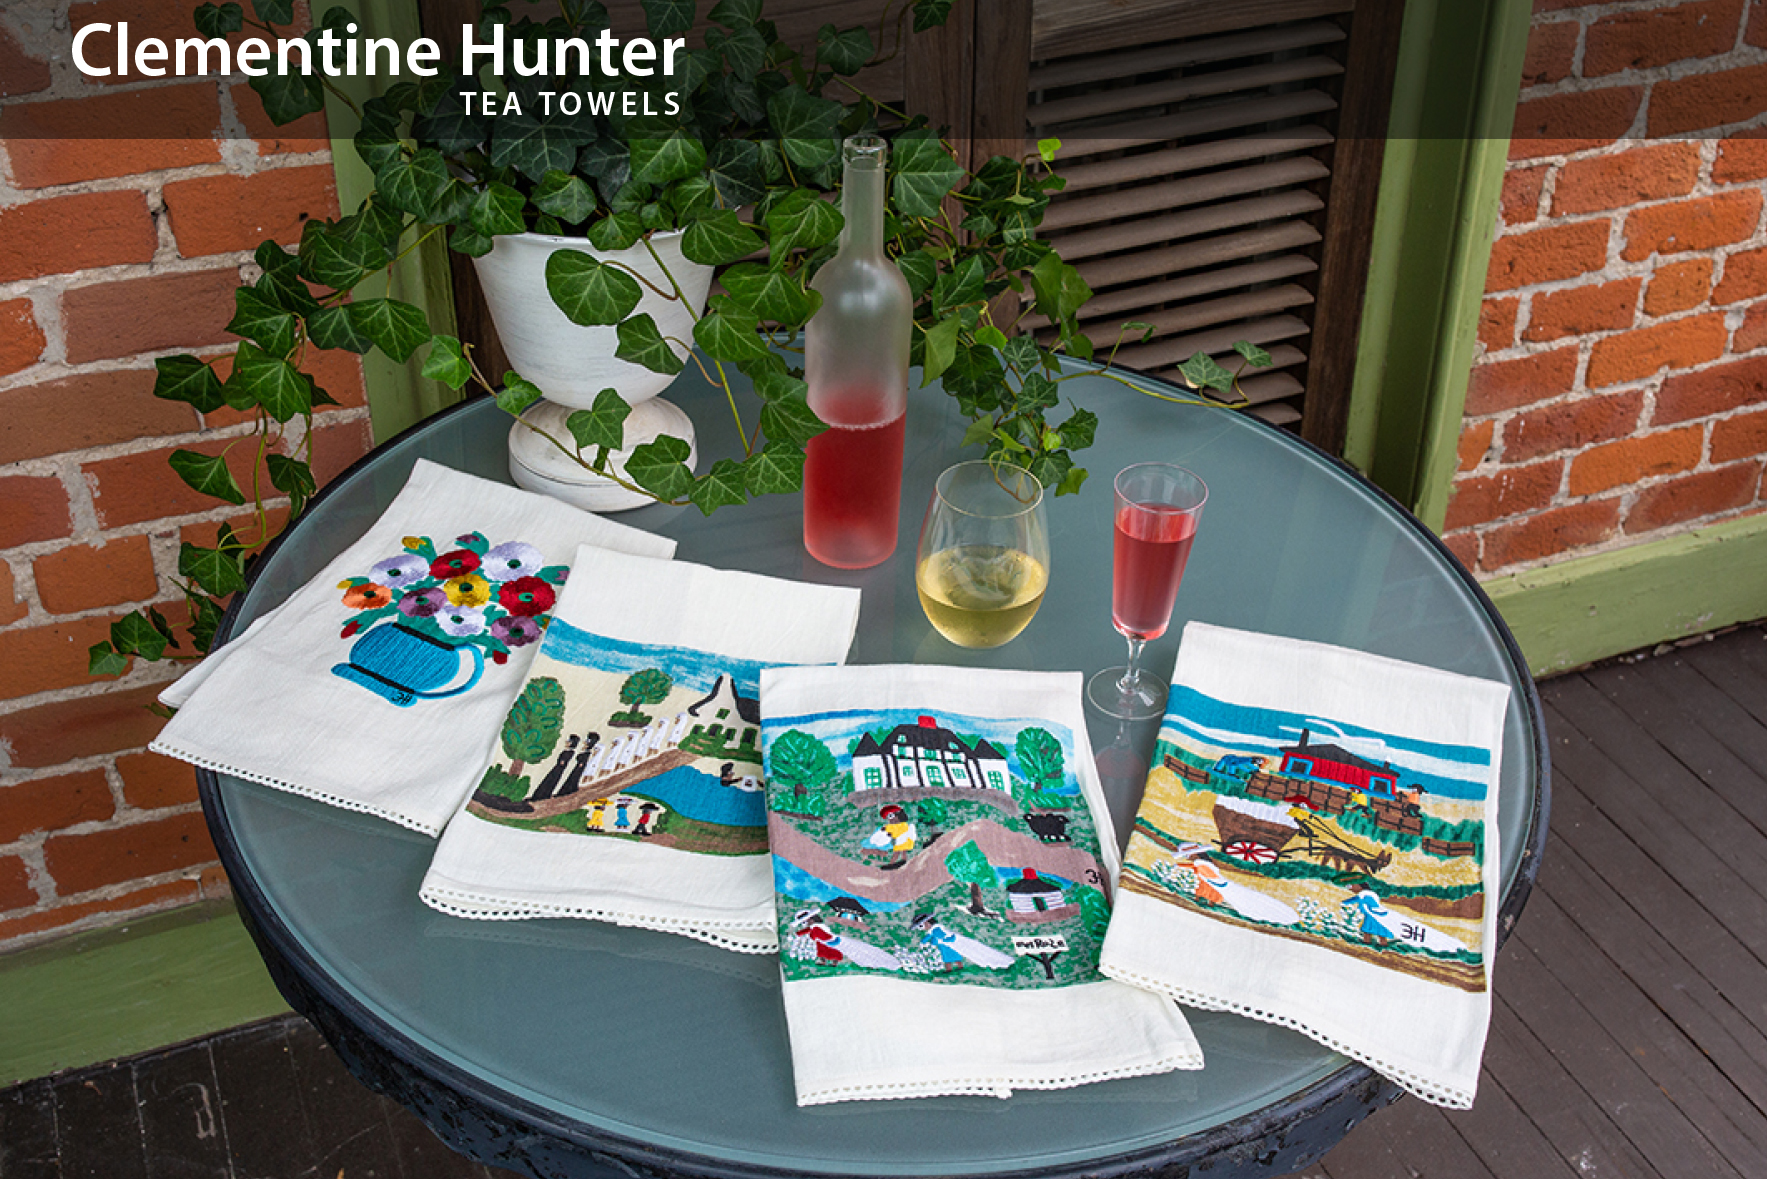 The Clementine Hunter Tea Towel Collection